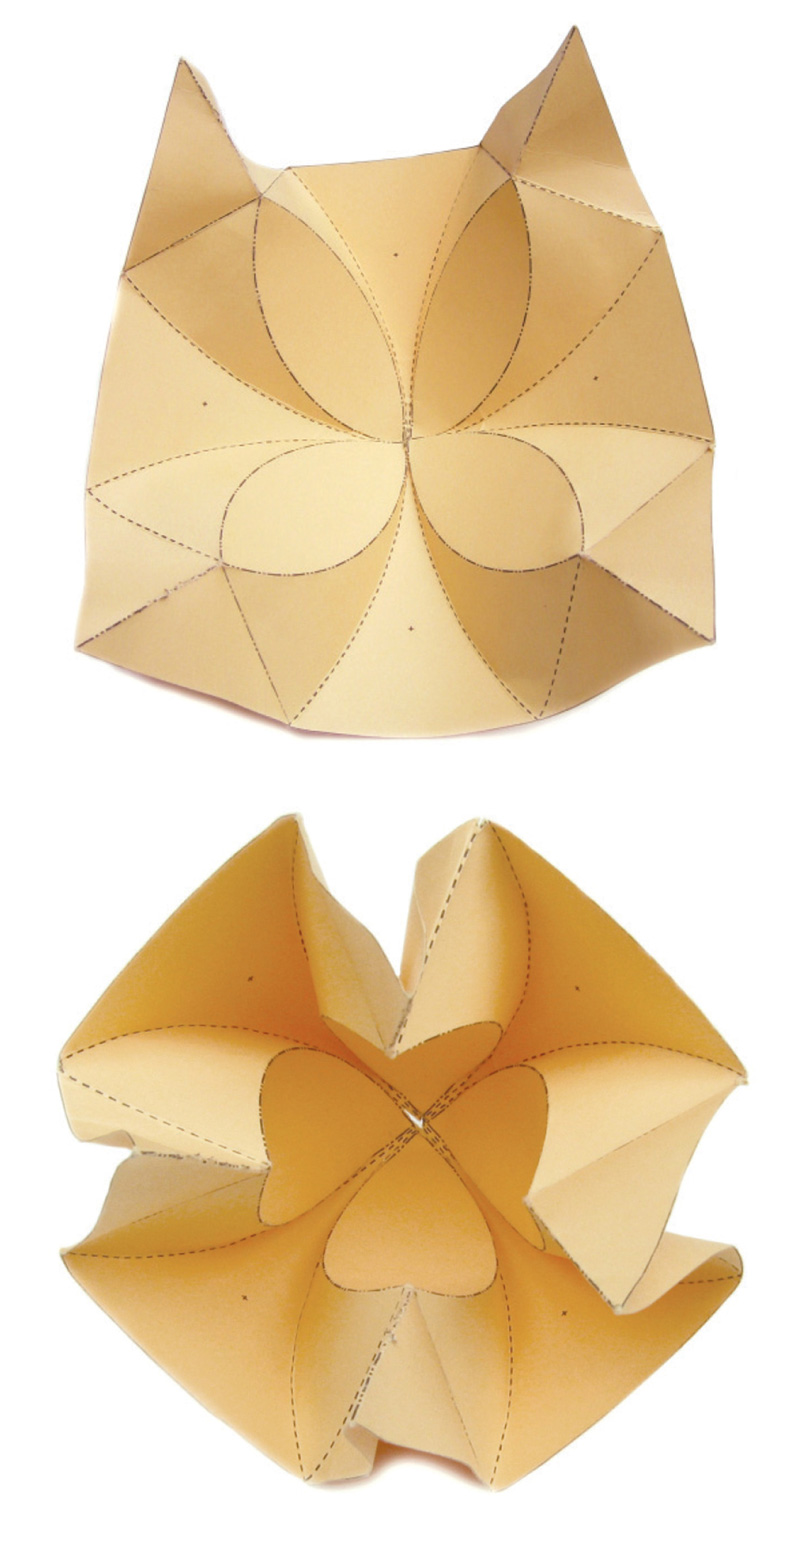 A photograph showing two steps of the folding process to make an origami bud.